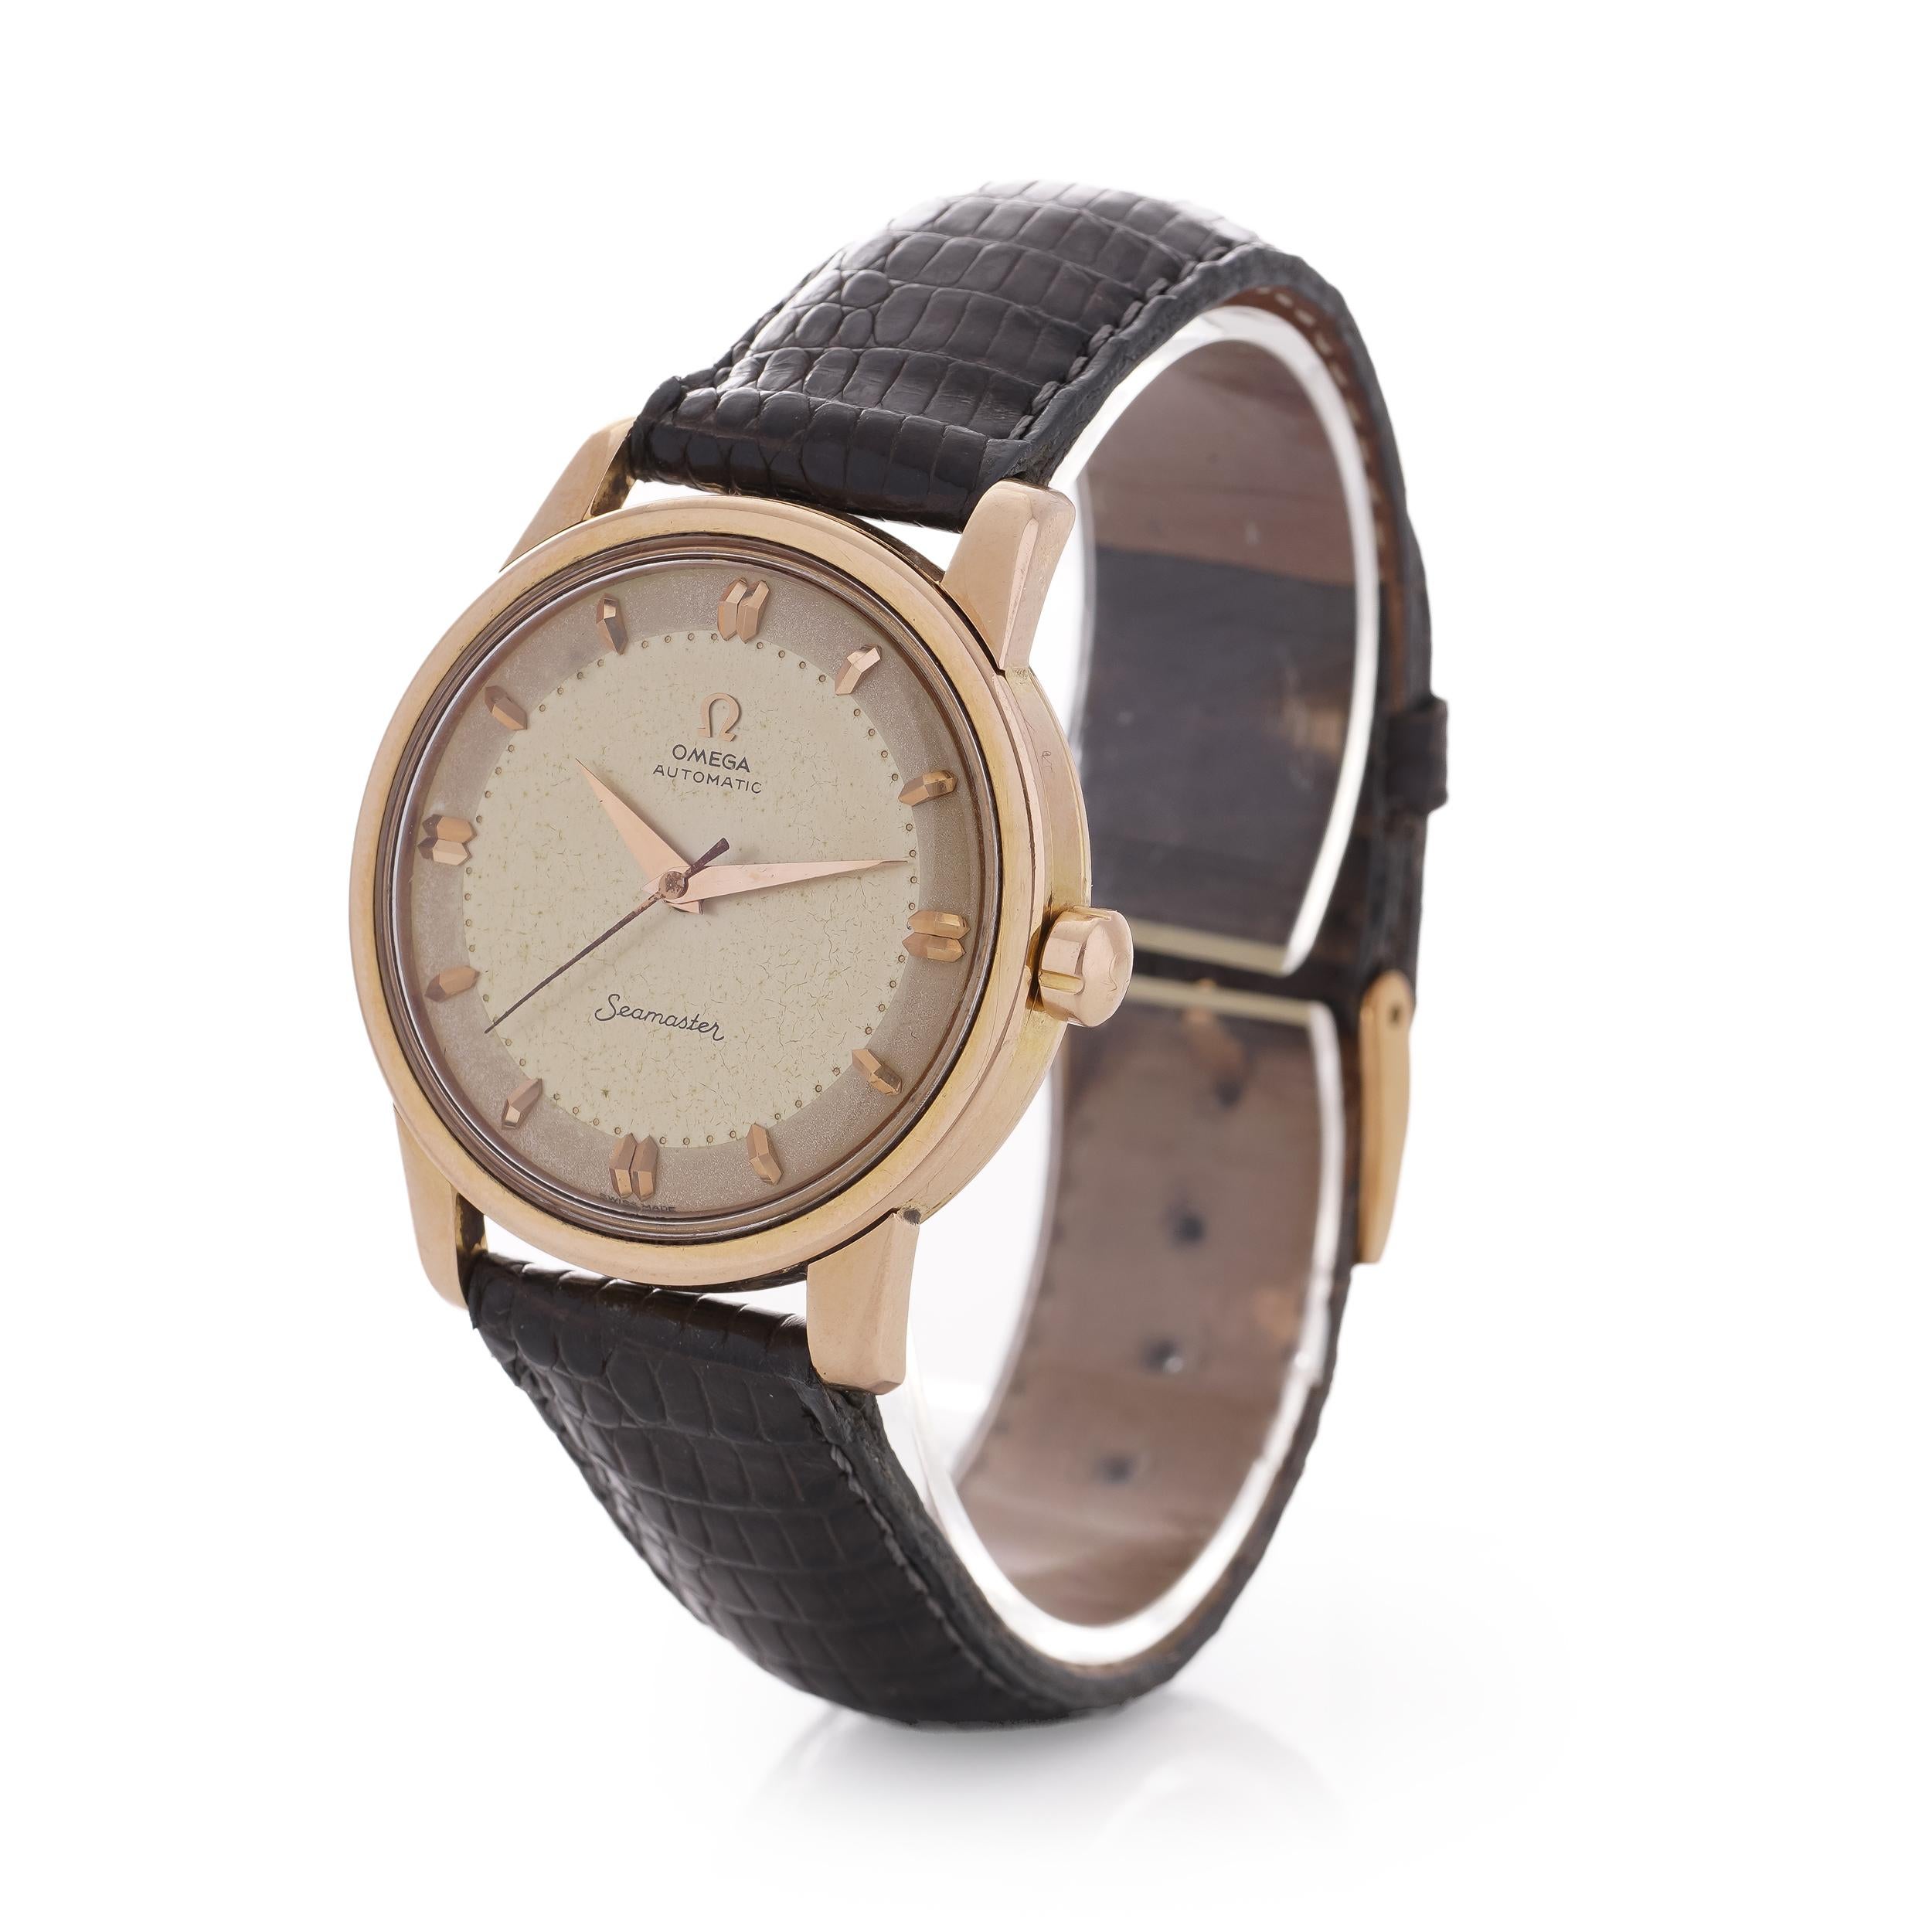 Omega Seamaster Automatic  Vintage 18kt. pink gold Cal.501 men's wristwatch. 

Period: 1956 
Movement: 20 jewels, Automatic 
Calibre: 501 
Hour Markers:  'Diamond' Markers and 'Dauphine' Style Hands
Case Material: 18 KT GOLD
Dial colour: Gold 
Case